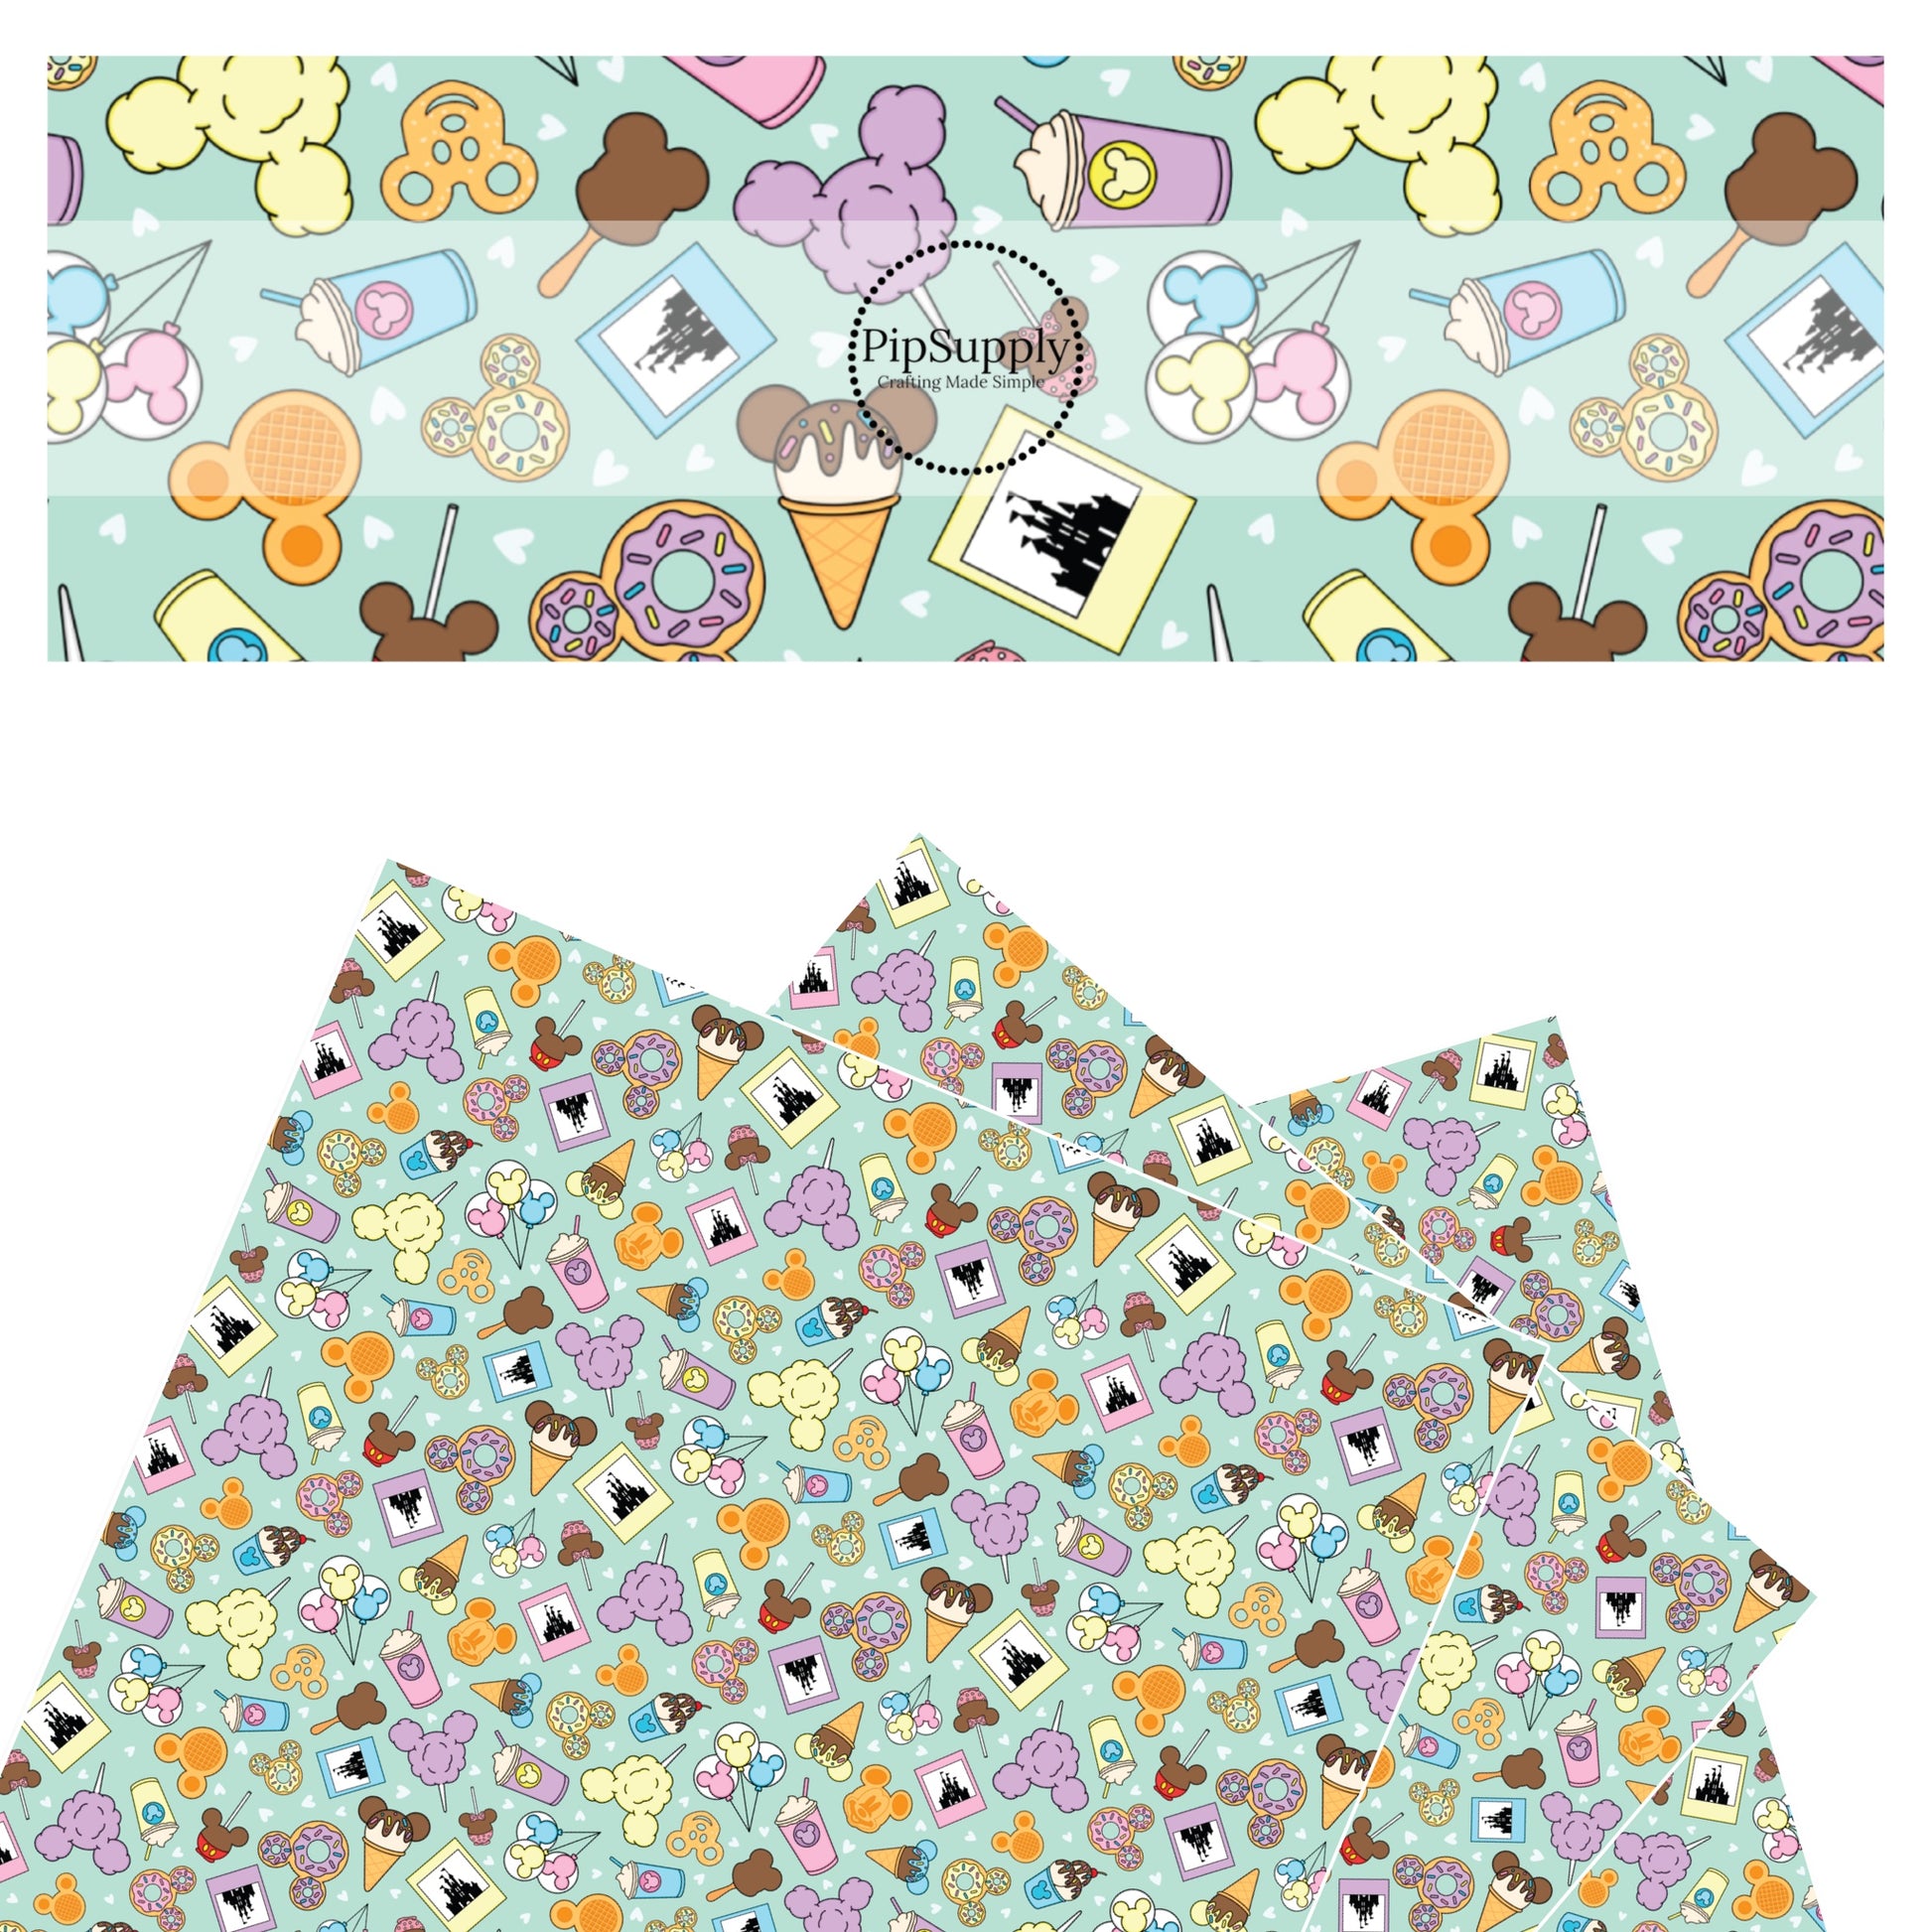 Combo of sweet treats and mouse ears on mint faux leather sheet.